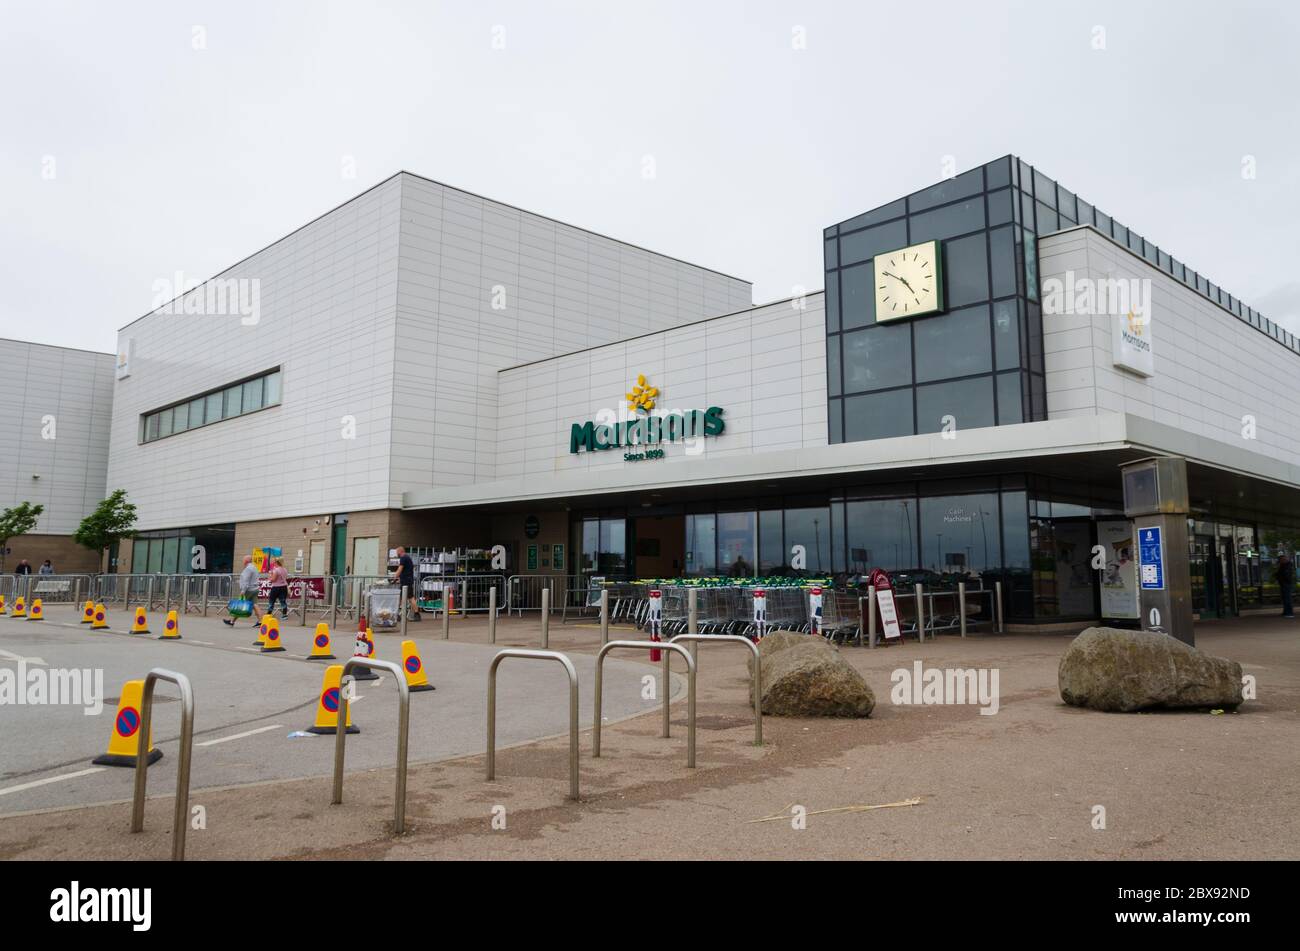 New Brighton, UK: Jun 3, 2020: The drop off and collection point at the front of Morrisons supermarket has been closed and coned off to help with soci Stock Photo